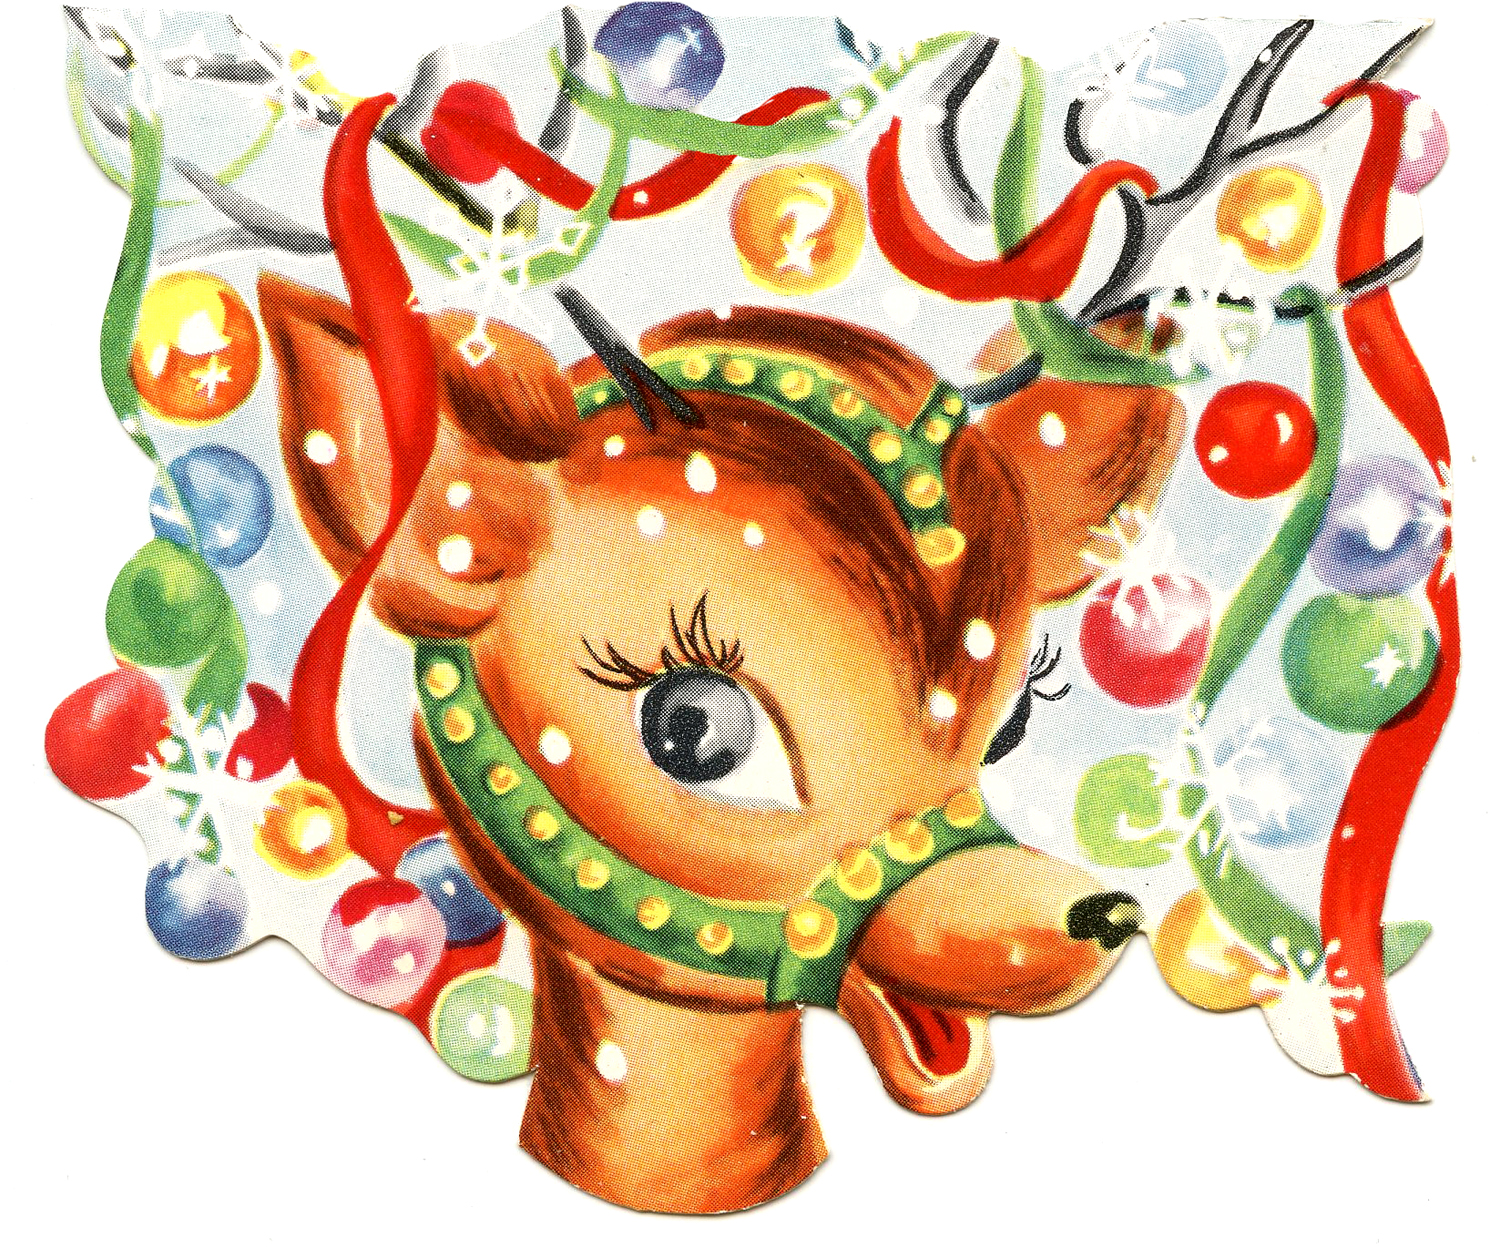 Retro Christmas Image   Colorful Cute Reindeer   The Graphics Fairy